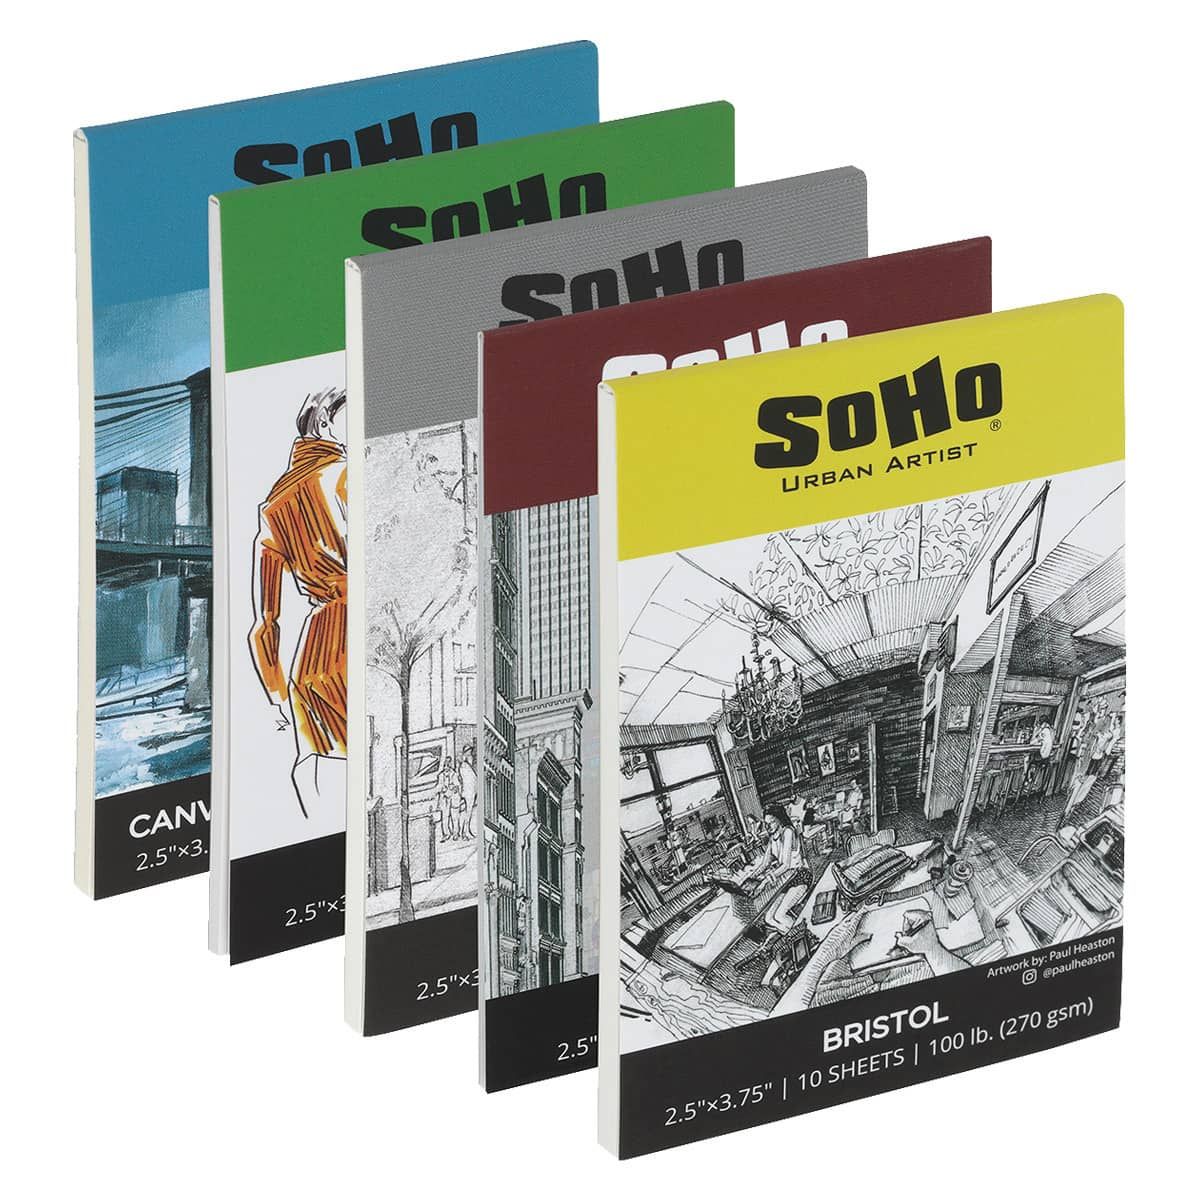 SoHo Urban Artist Acrylic Canvas Pads - Textured Canvas Paper Pad for  Painting, Drawing, Pastels, Travel, & More! - [Single - 6x6]